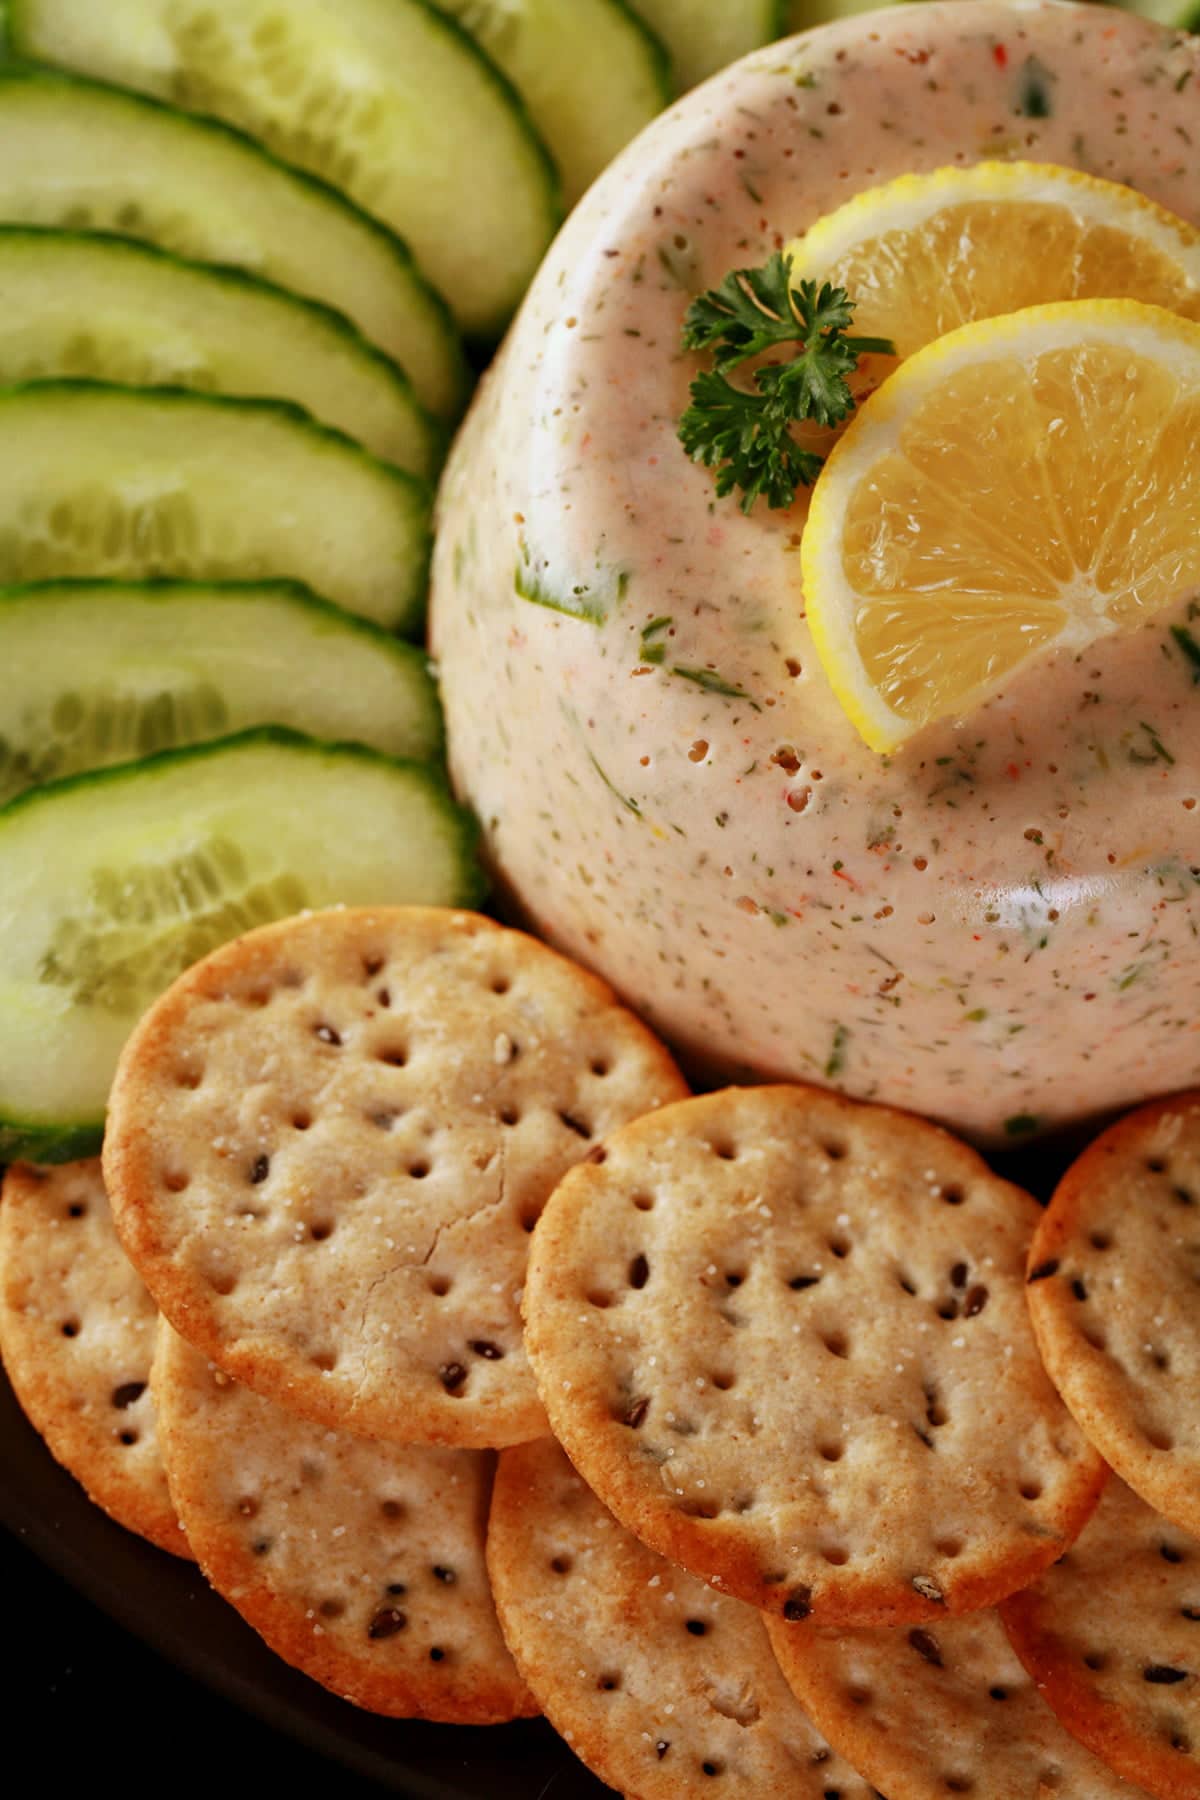 A closeup view of shrimp mousse. It is topped with slices of lemon and a sprig of parsley, and is surrounded by cucumber slices and crackers.